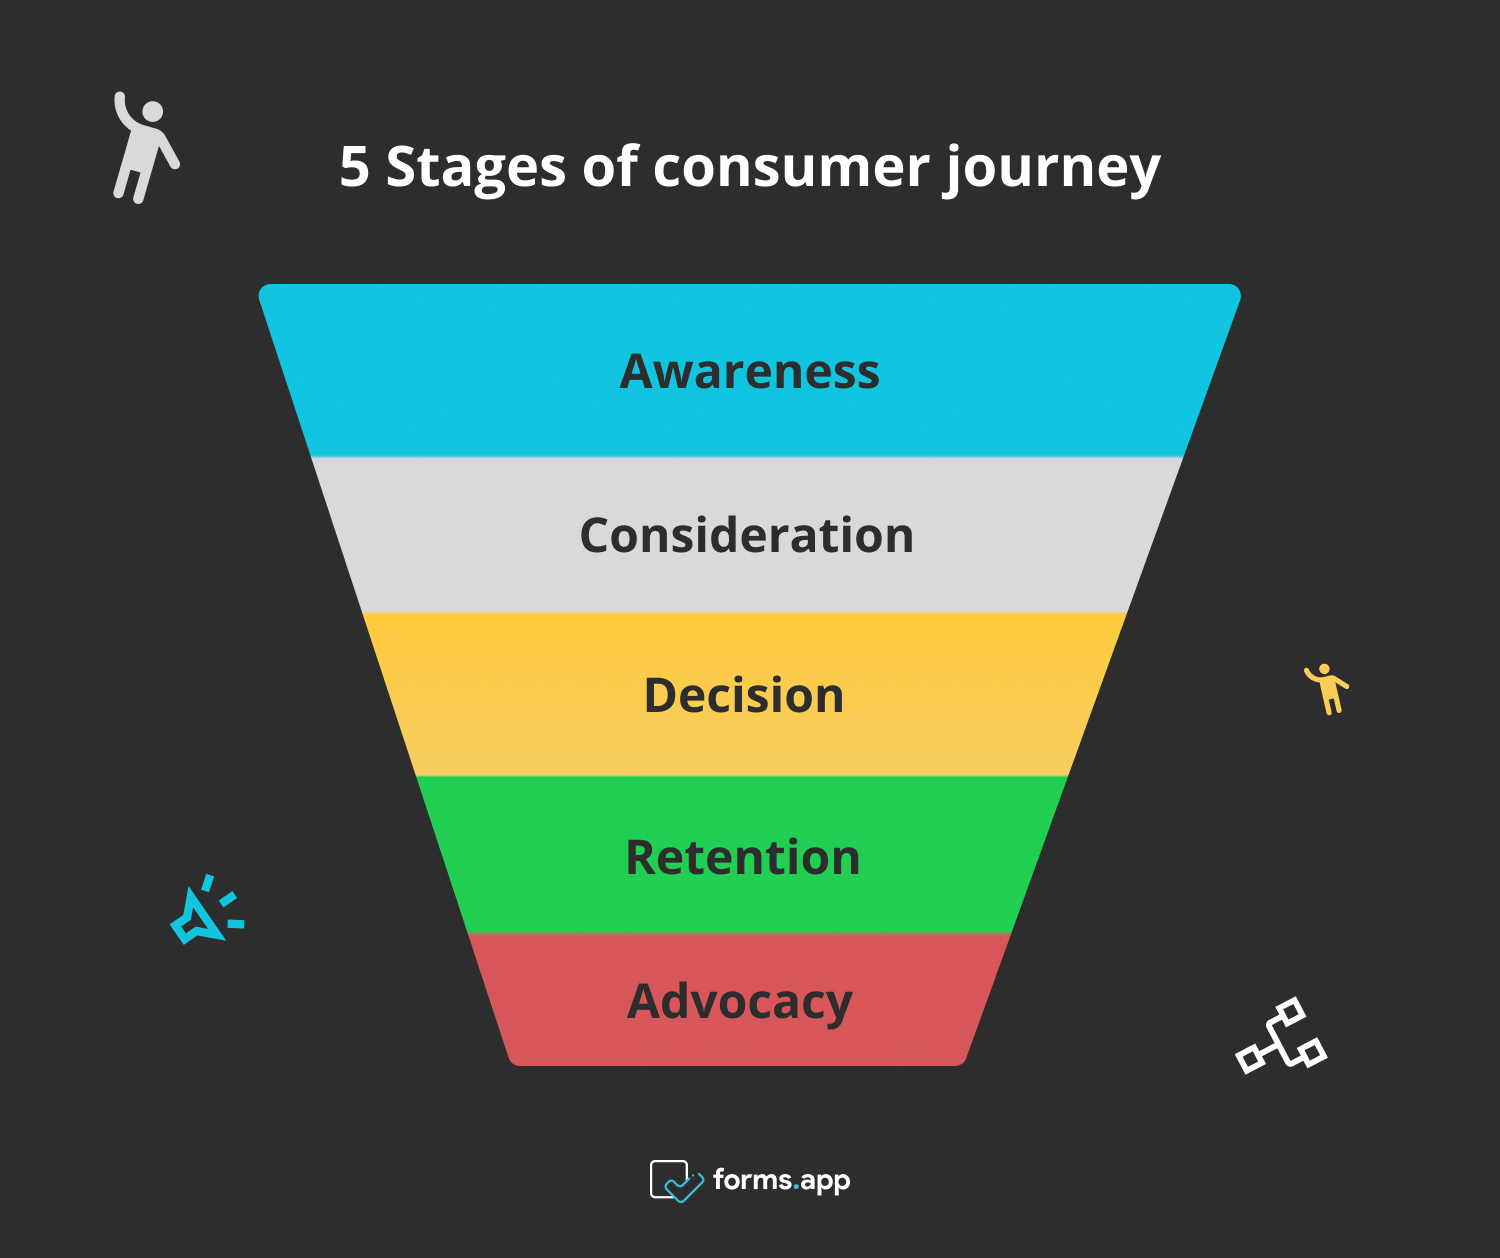 5 Stages of consumer journey